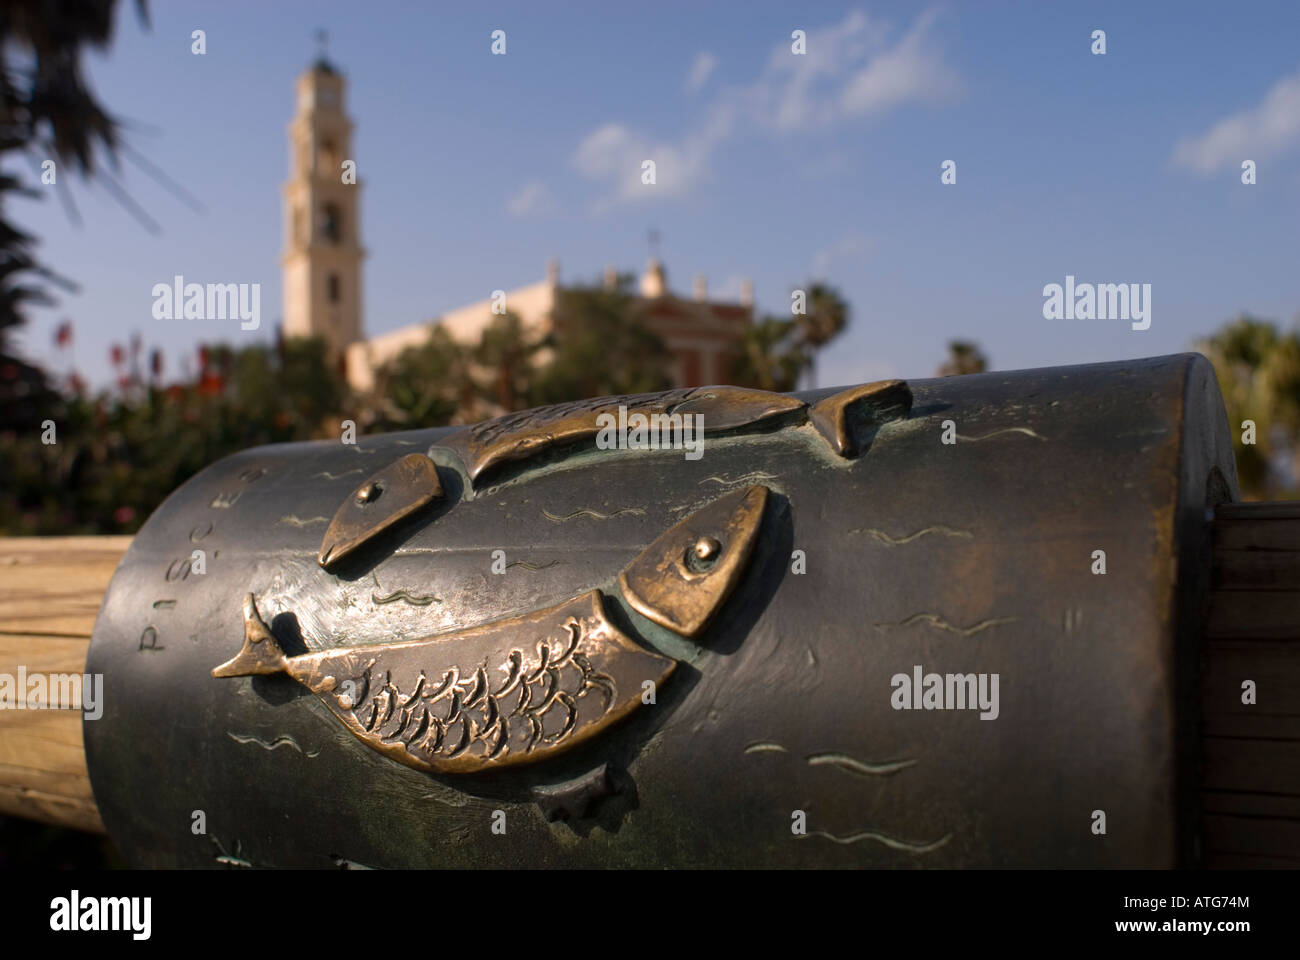 Relief of the Pisces astrological sign in the banister of the 'Wishing Bridge' with St Peter church in background, Old Jaffa Israel Stock Photo